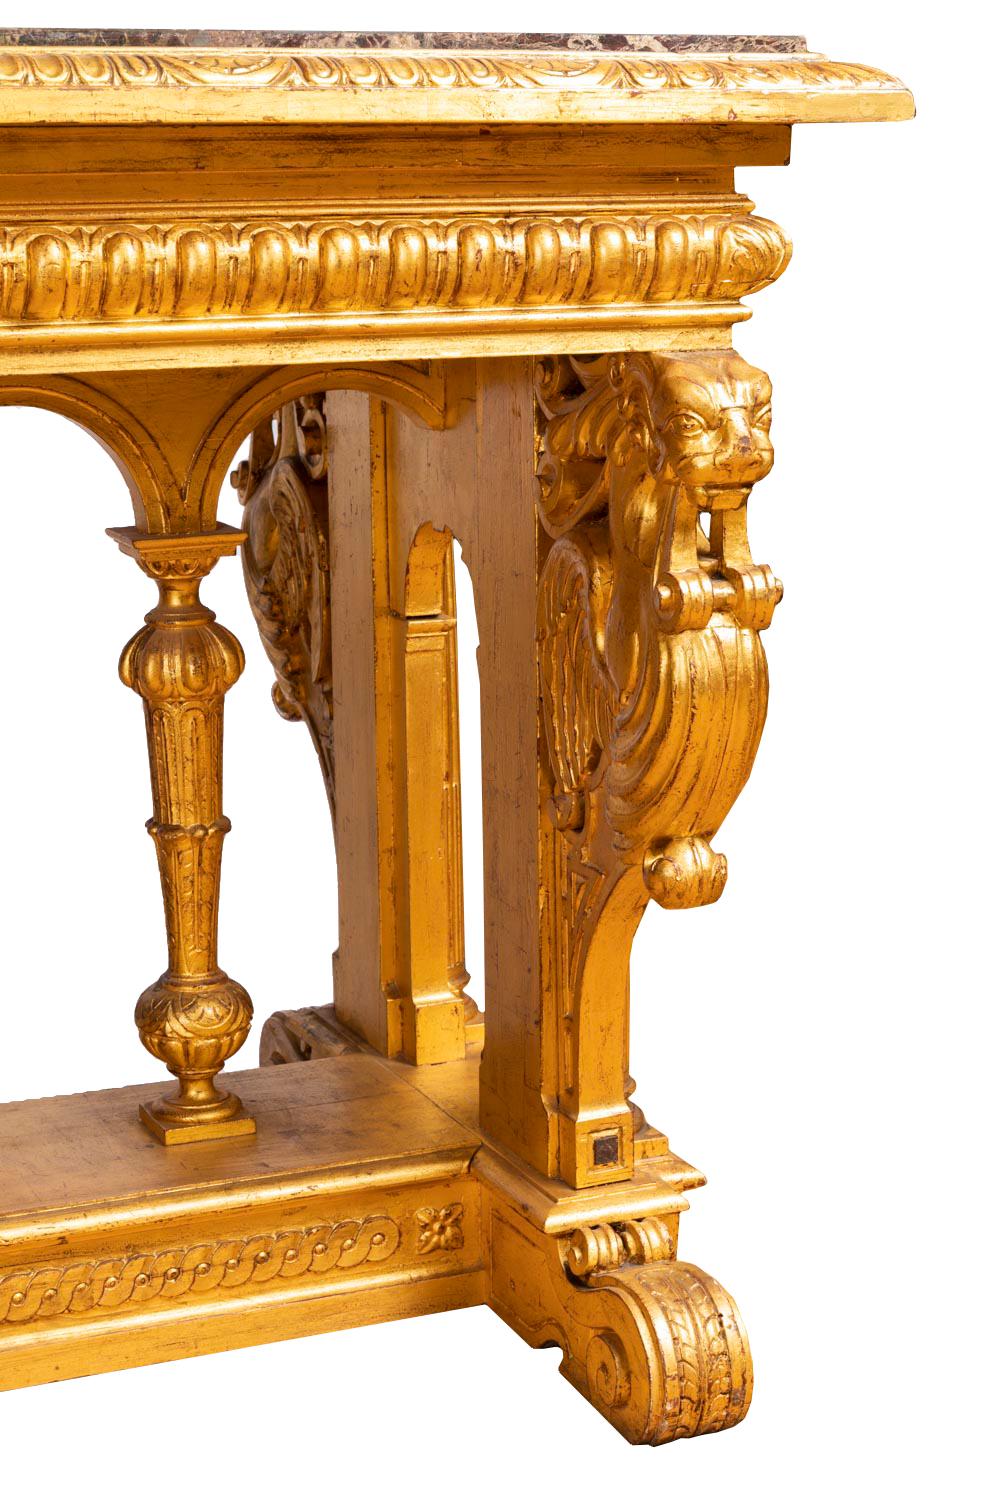 Renaissance style table in giltwood standing on four short small feet in shape of flattened foliage scrolls. Stand in the style of Roman cartibulum, in French called “fan” table because of the shape of the stand. A crossing adorned with interlaces